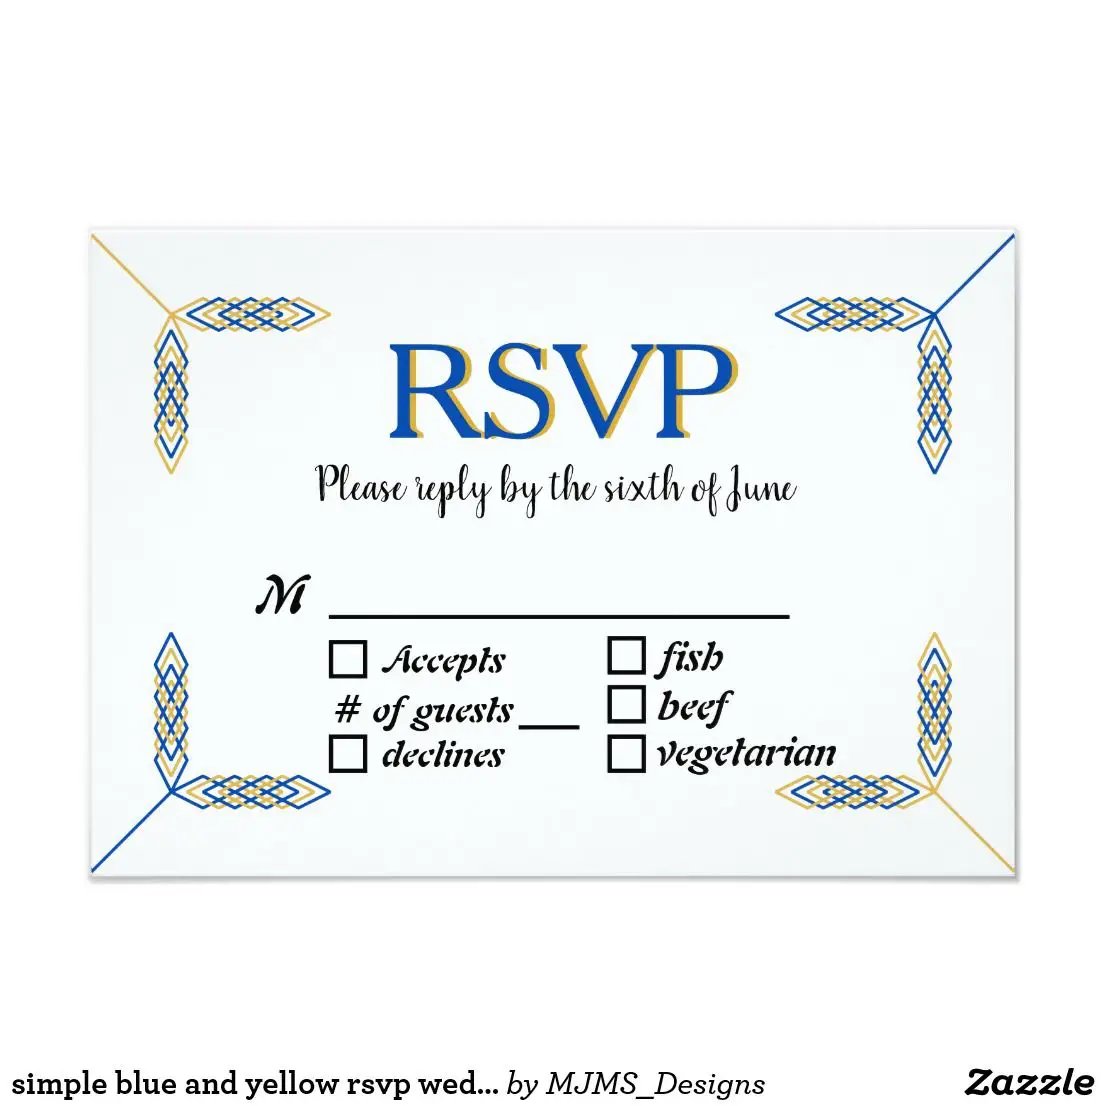 simple blue and yellow rsvp wedding reply cards #wedding #rsvp # ...